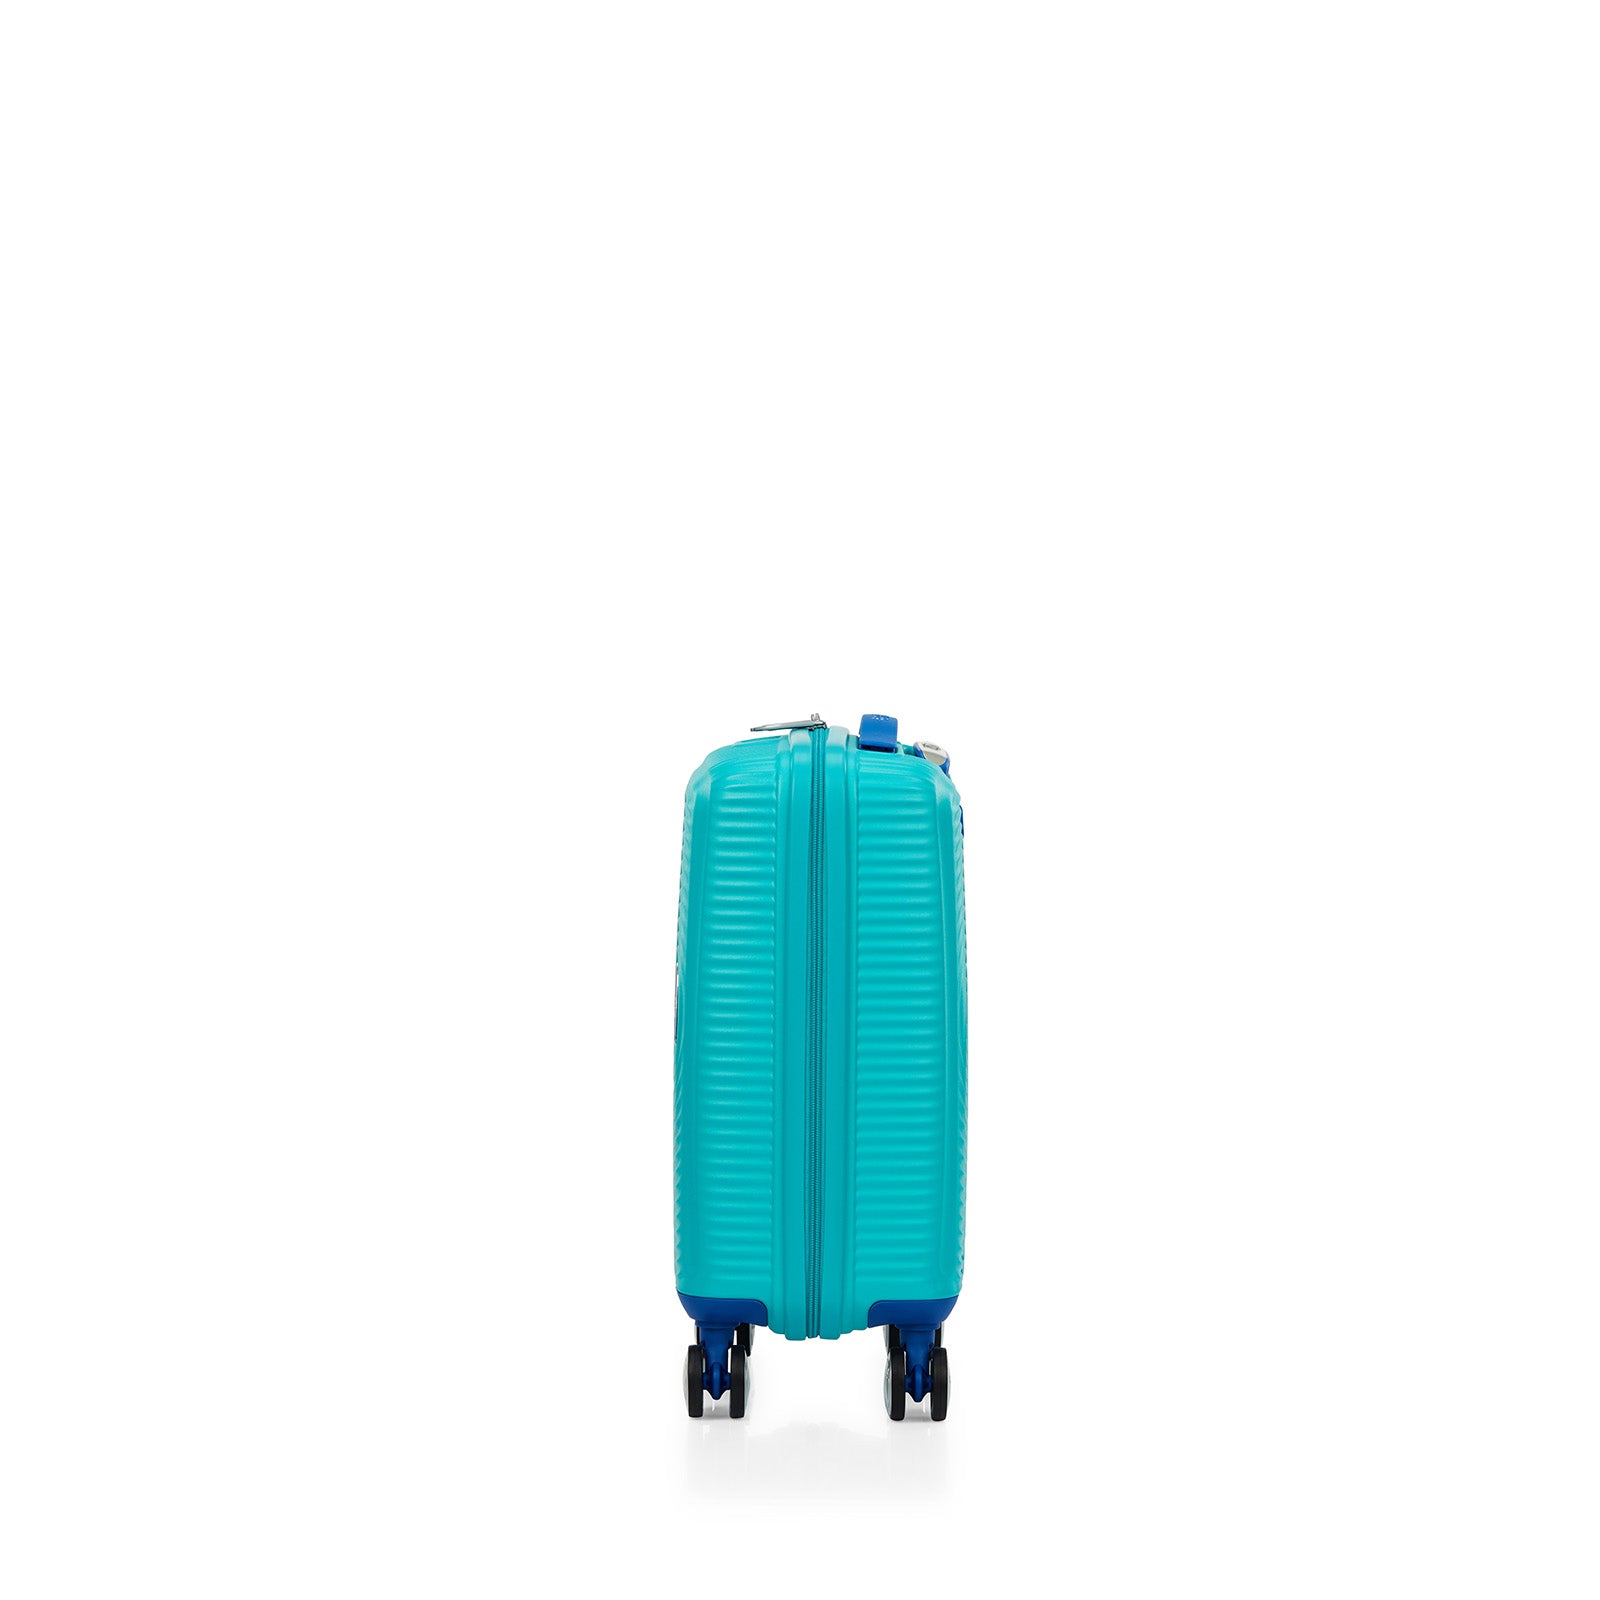 American-Tourister-Little-Curio-47cm-Carry-On-Suitcase-Teal-Blue-Side